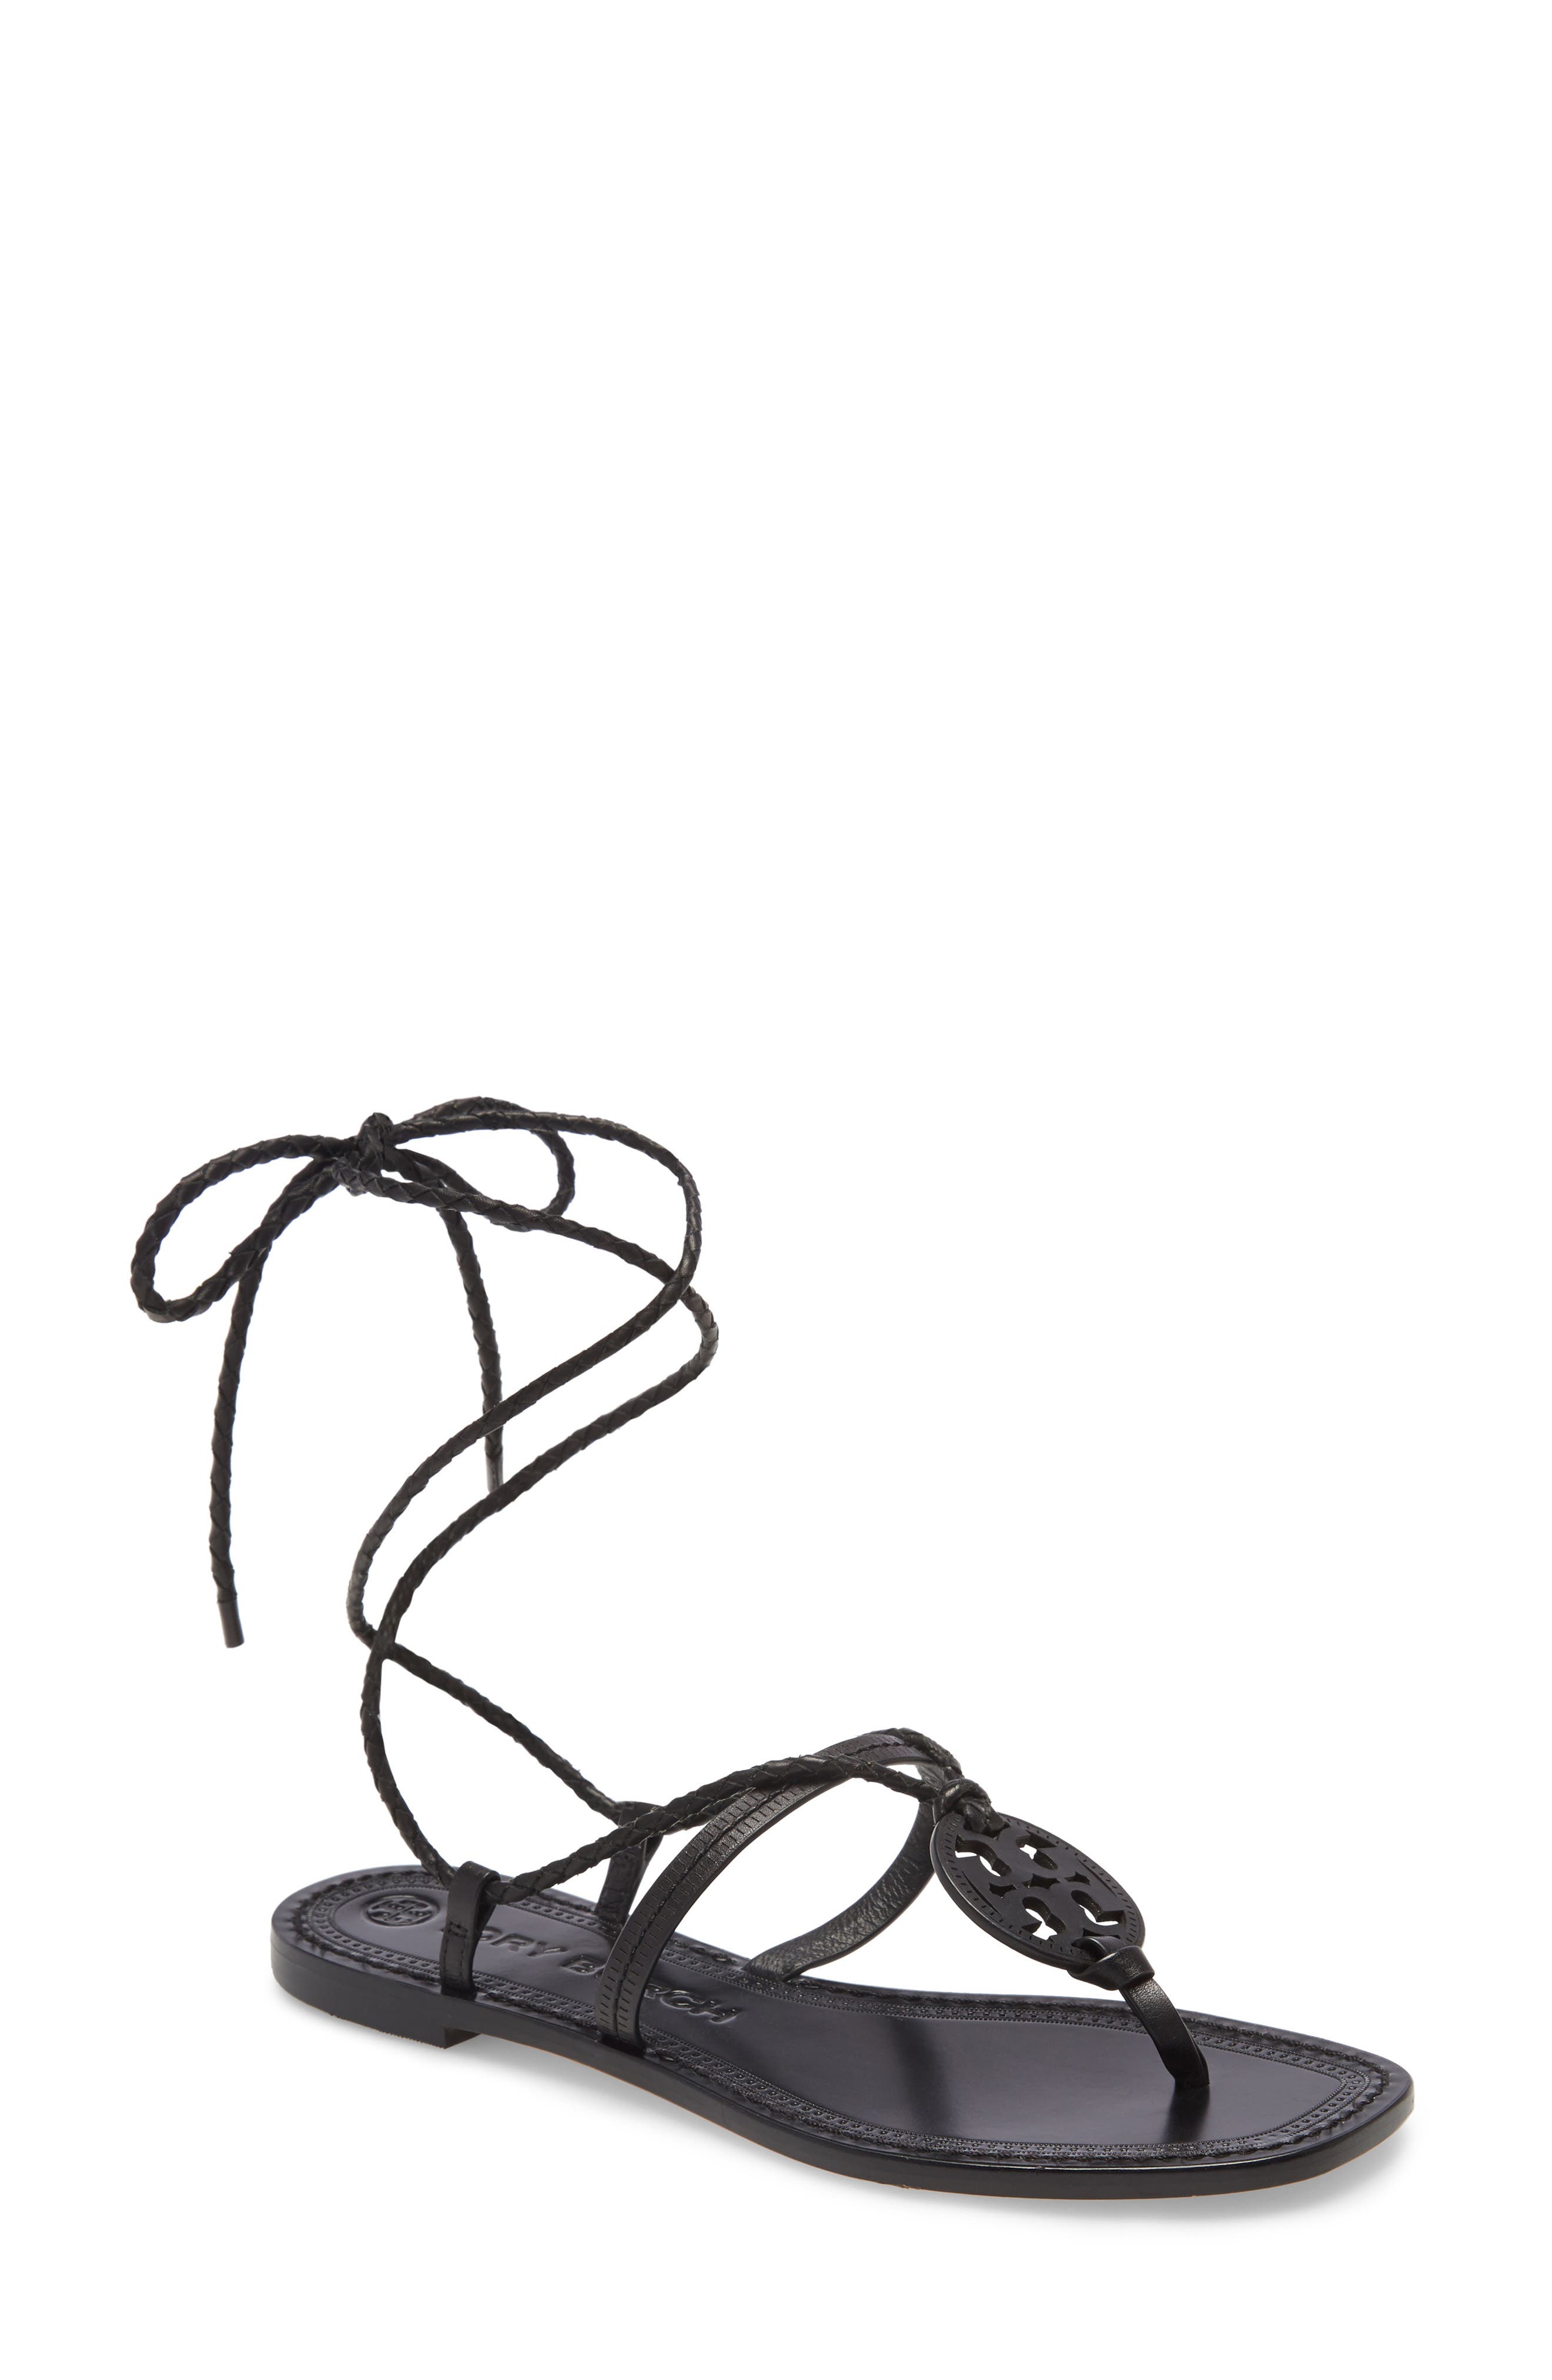 Tory Burch Miller Braided Ankle Tie 